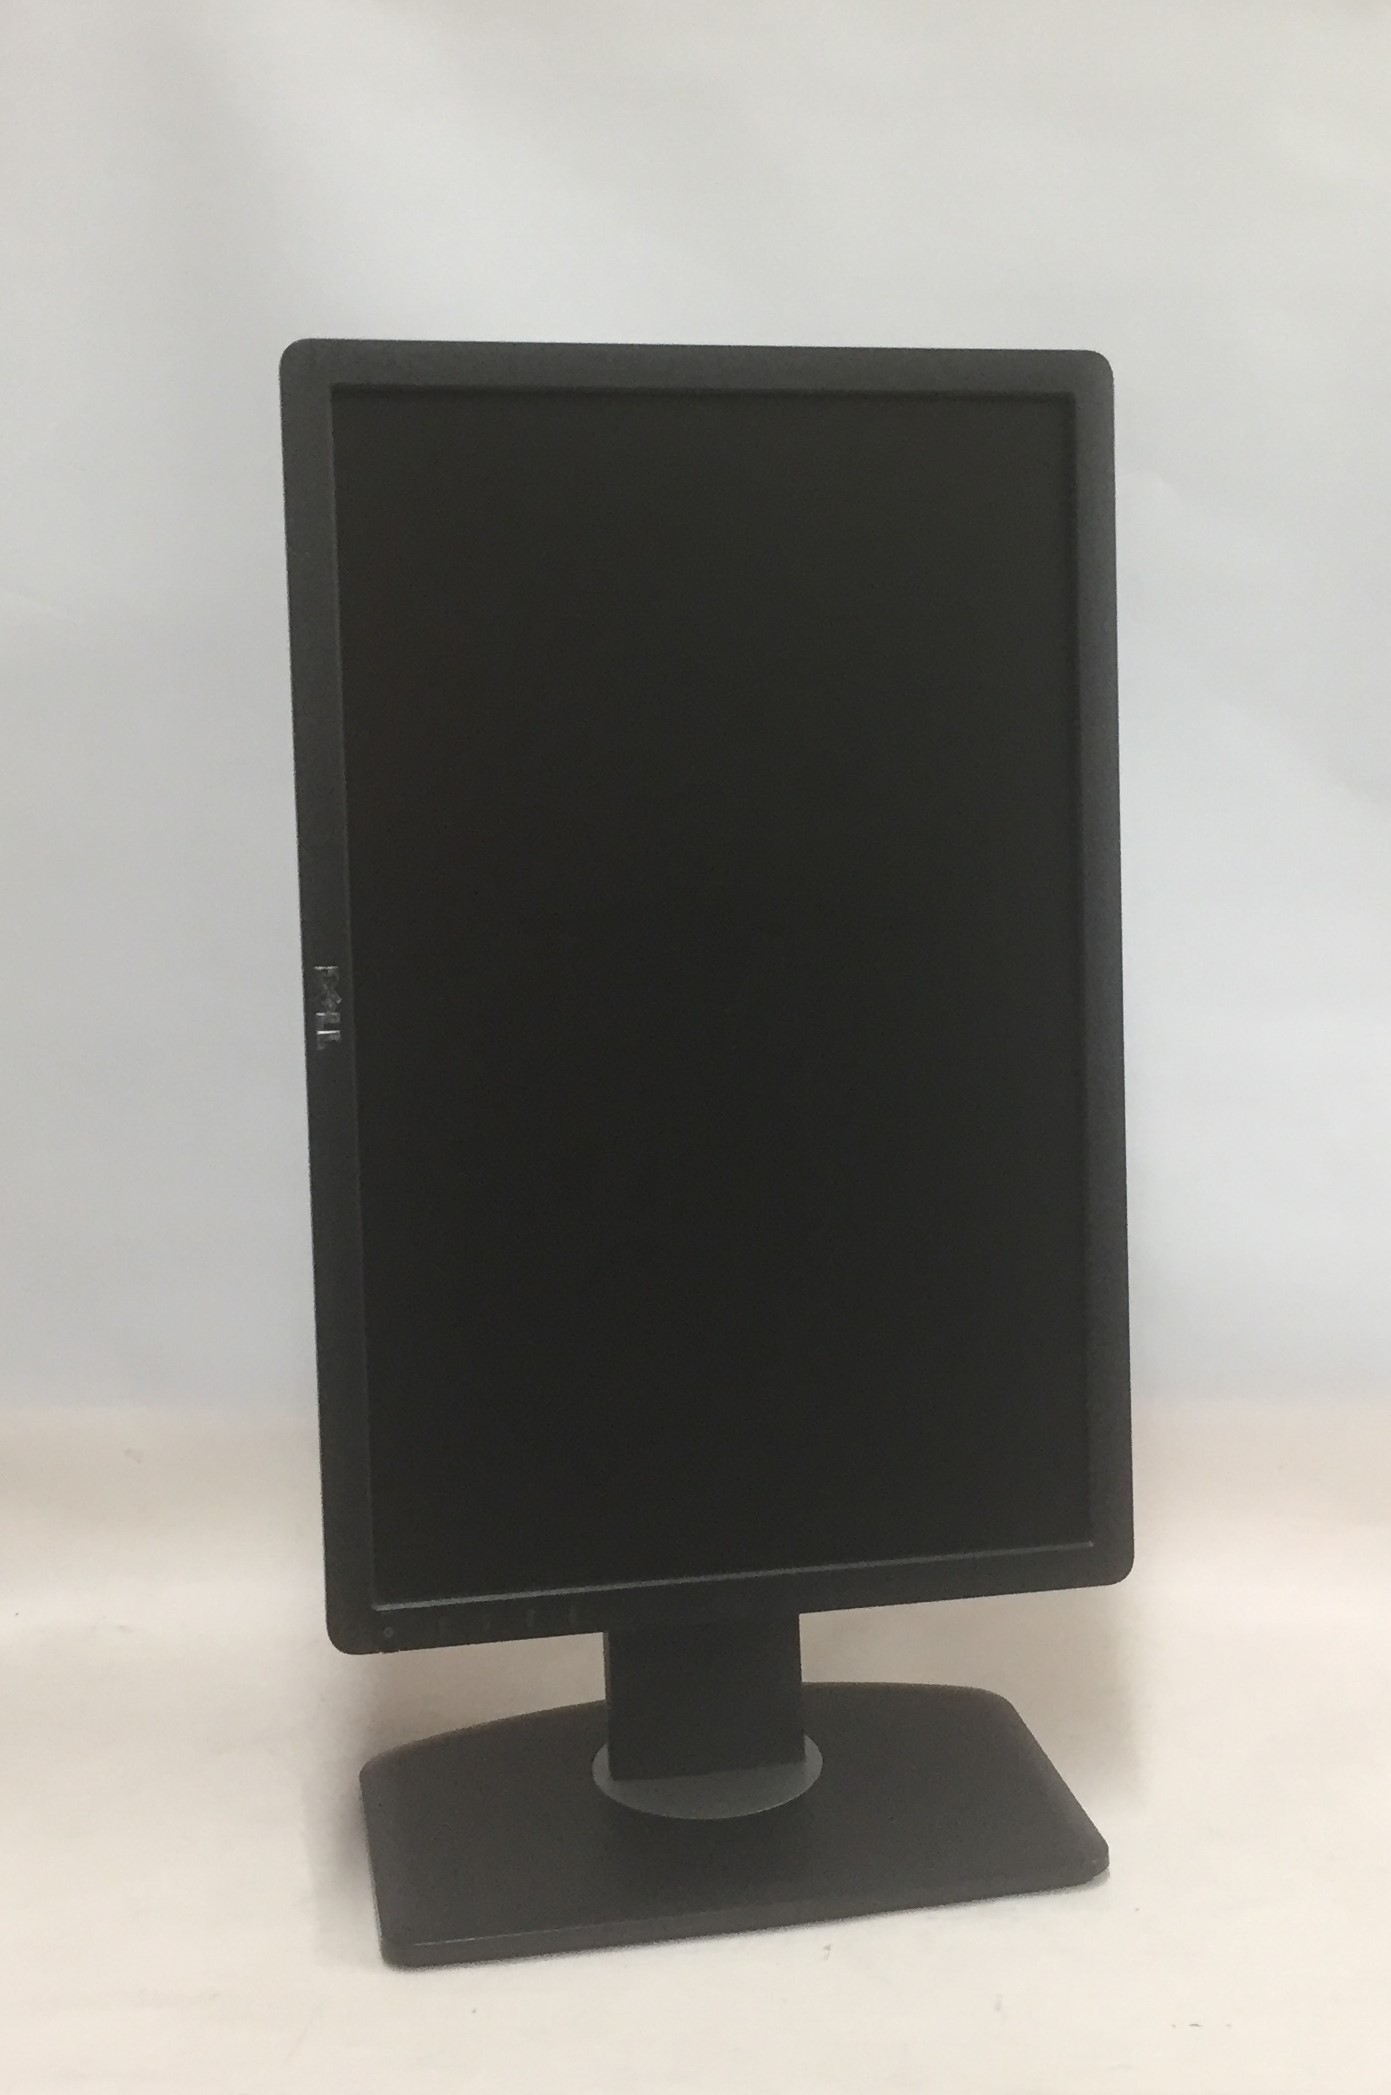 Refurbished Dell P1913t LED Monitor